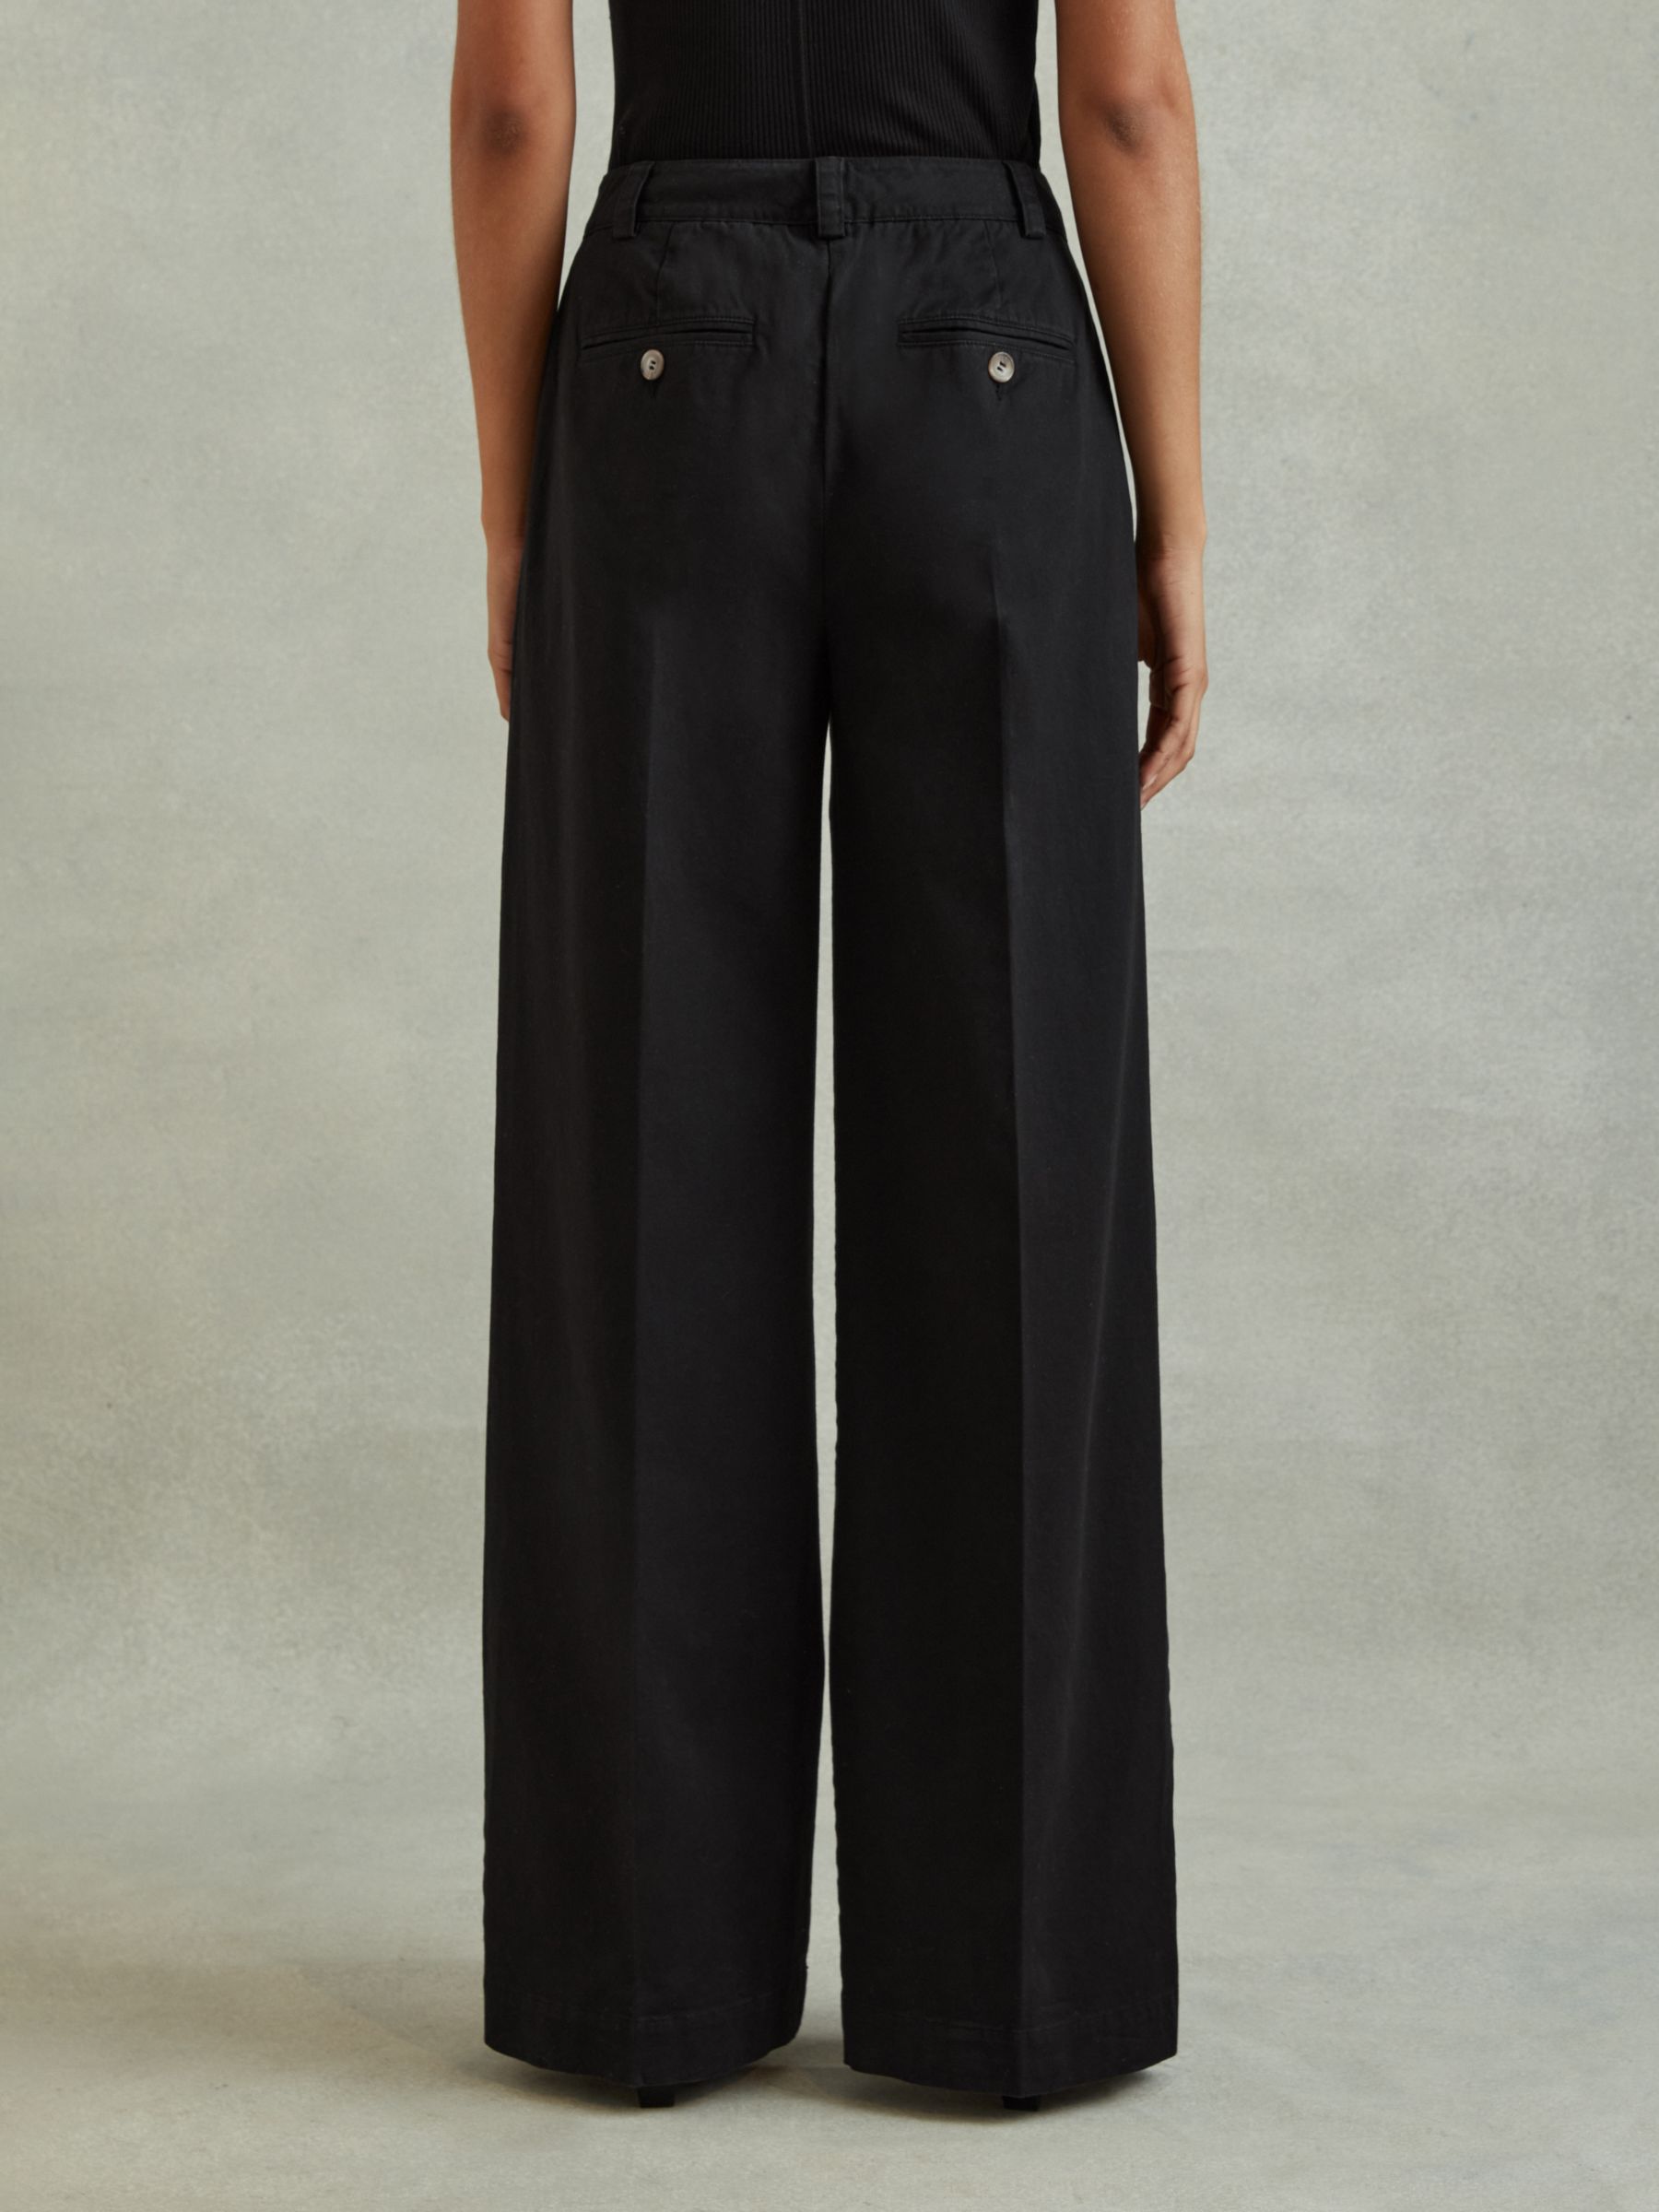 Buy Reiss Astrid Wide Leg Pleat Front Trousers Online at johnlewis.com